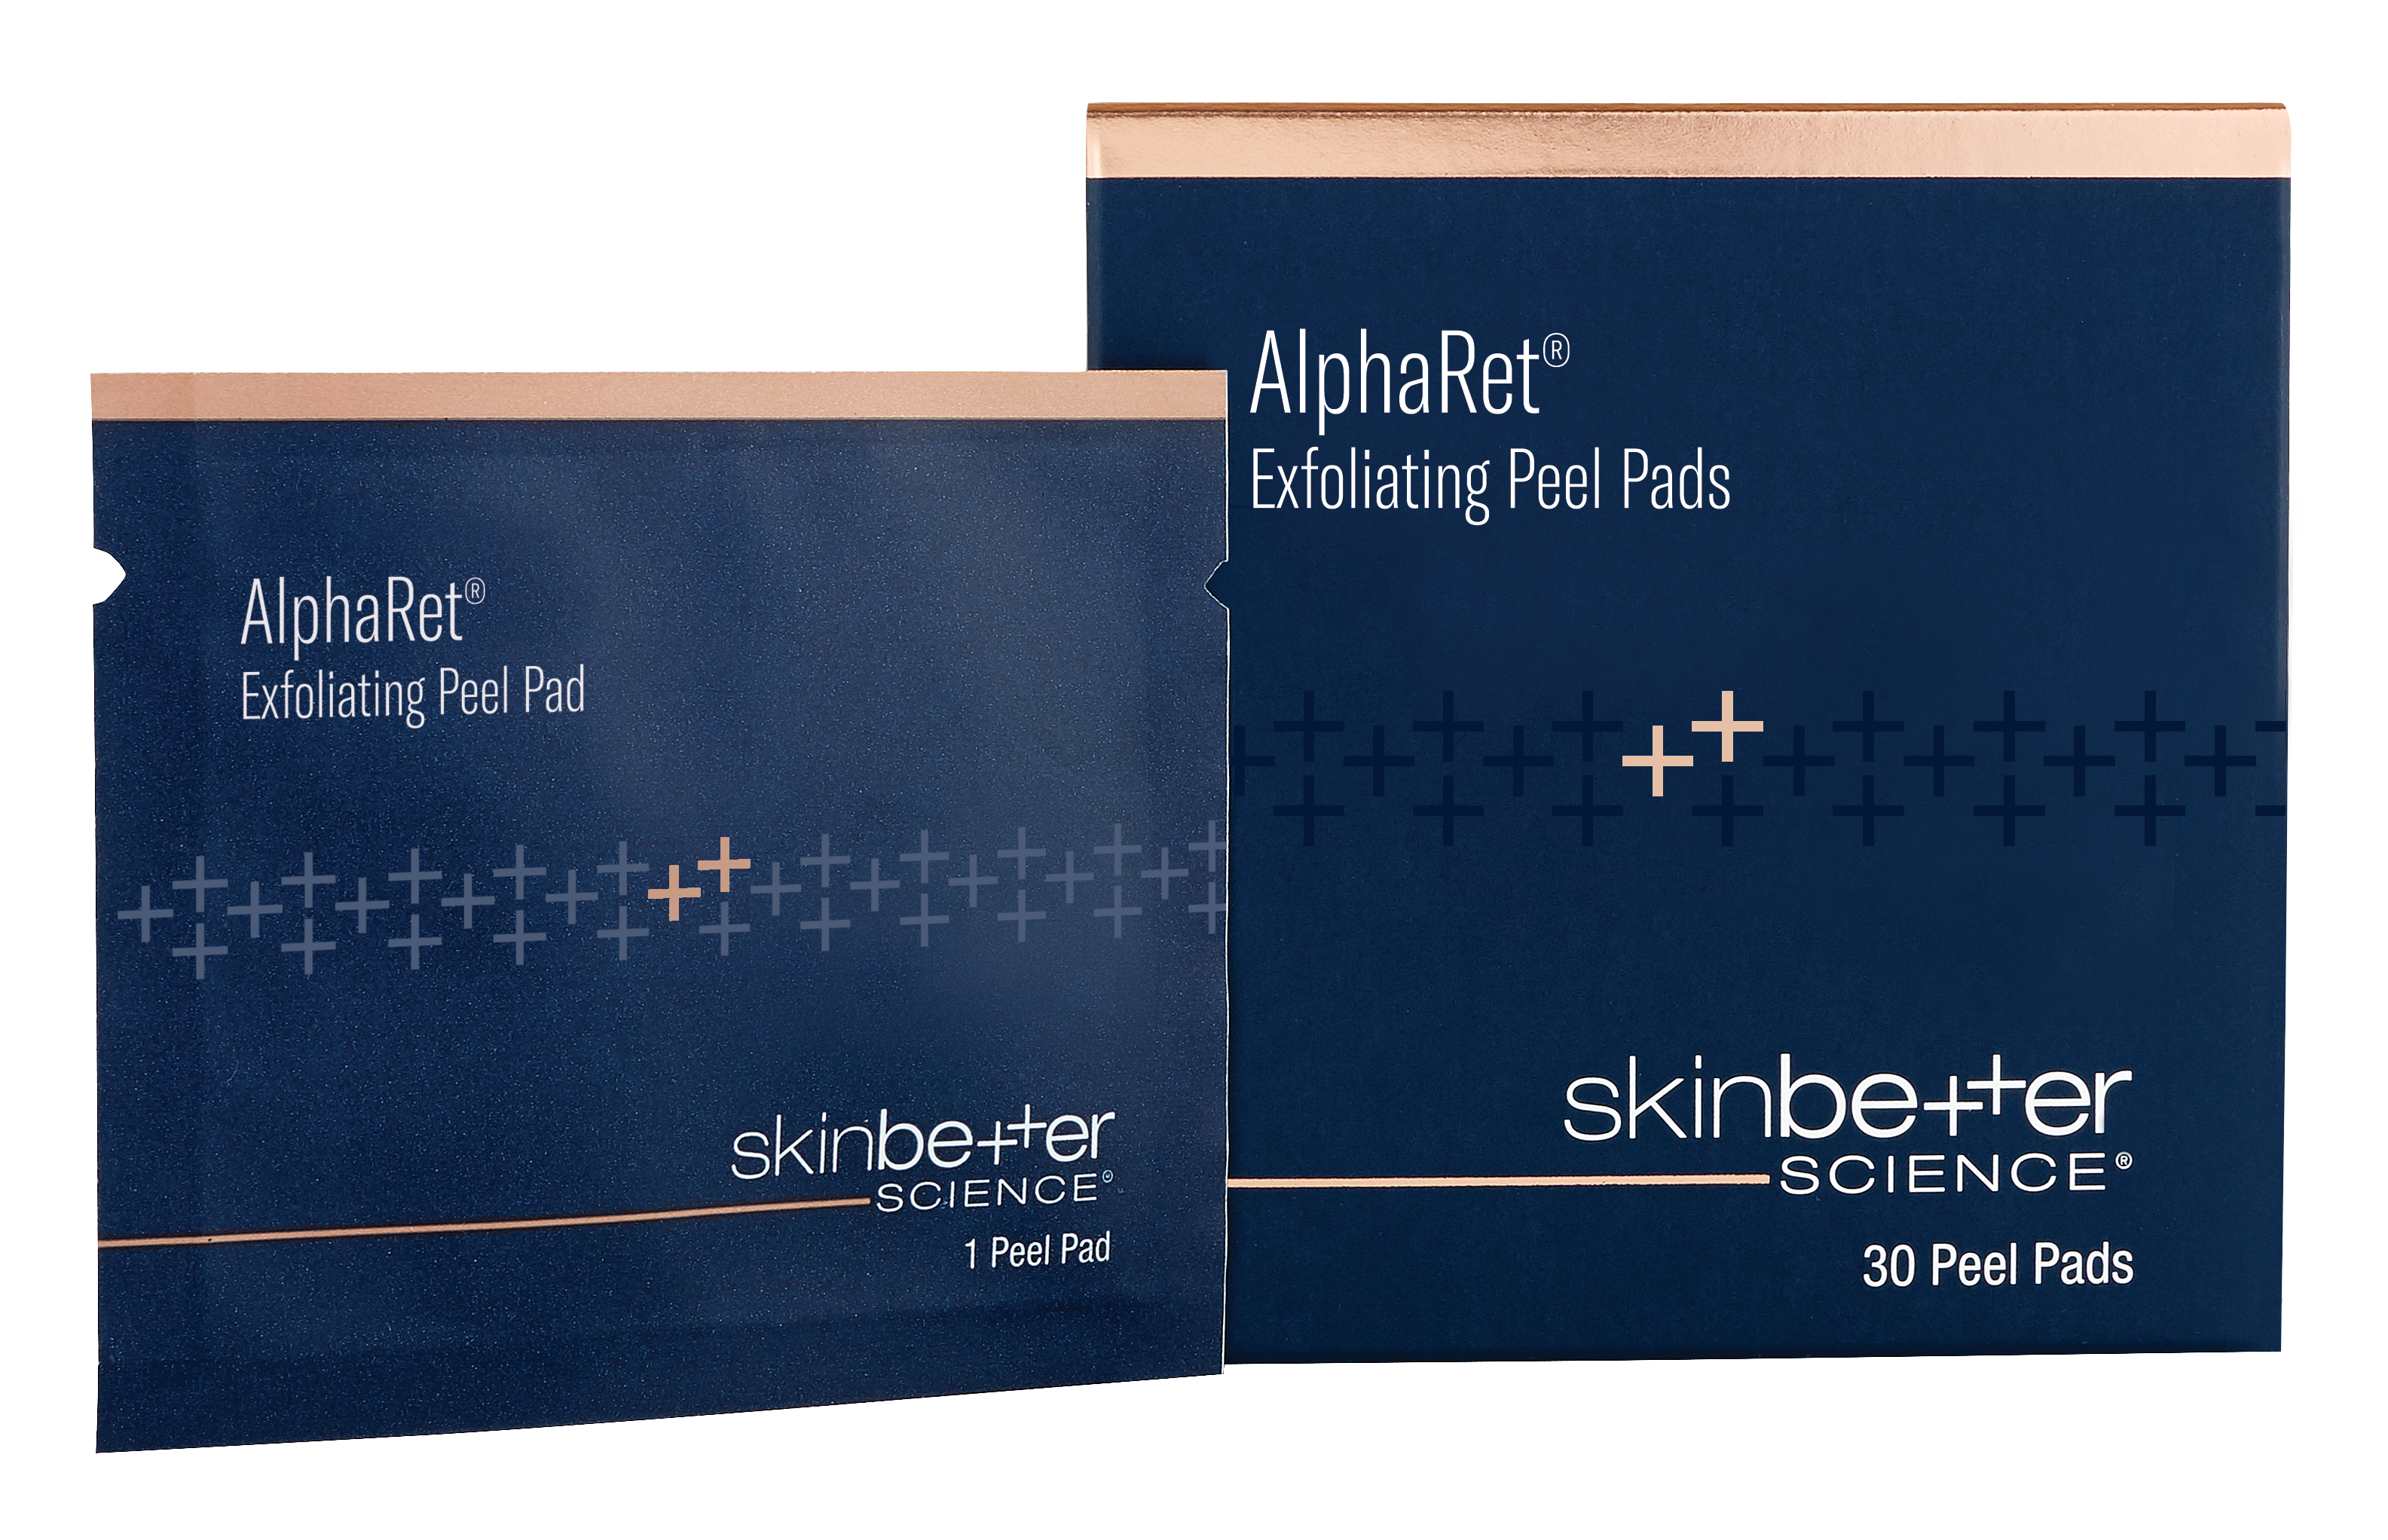 skinbetter science product we carry at Rammos Plastic Surgery & MedSpa